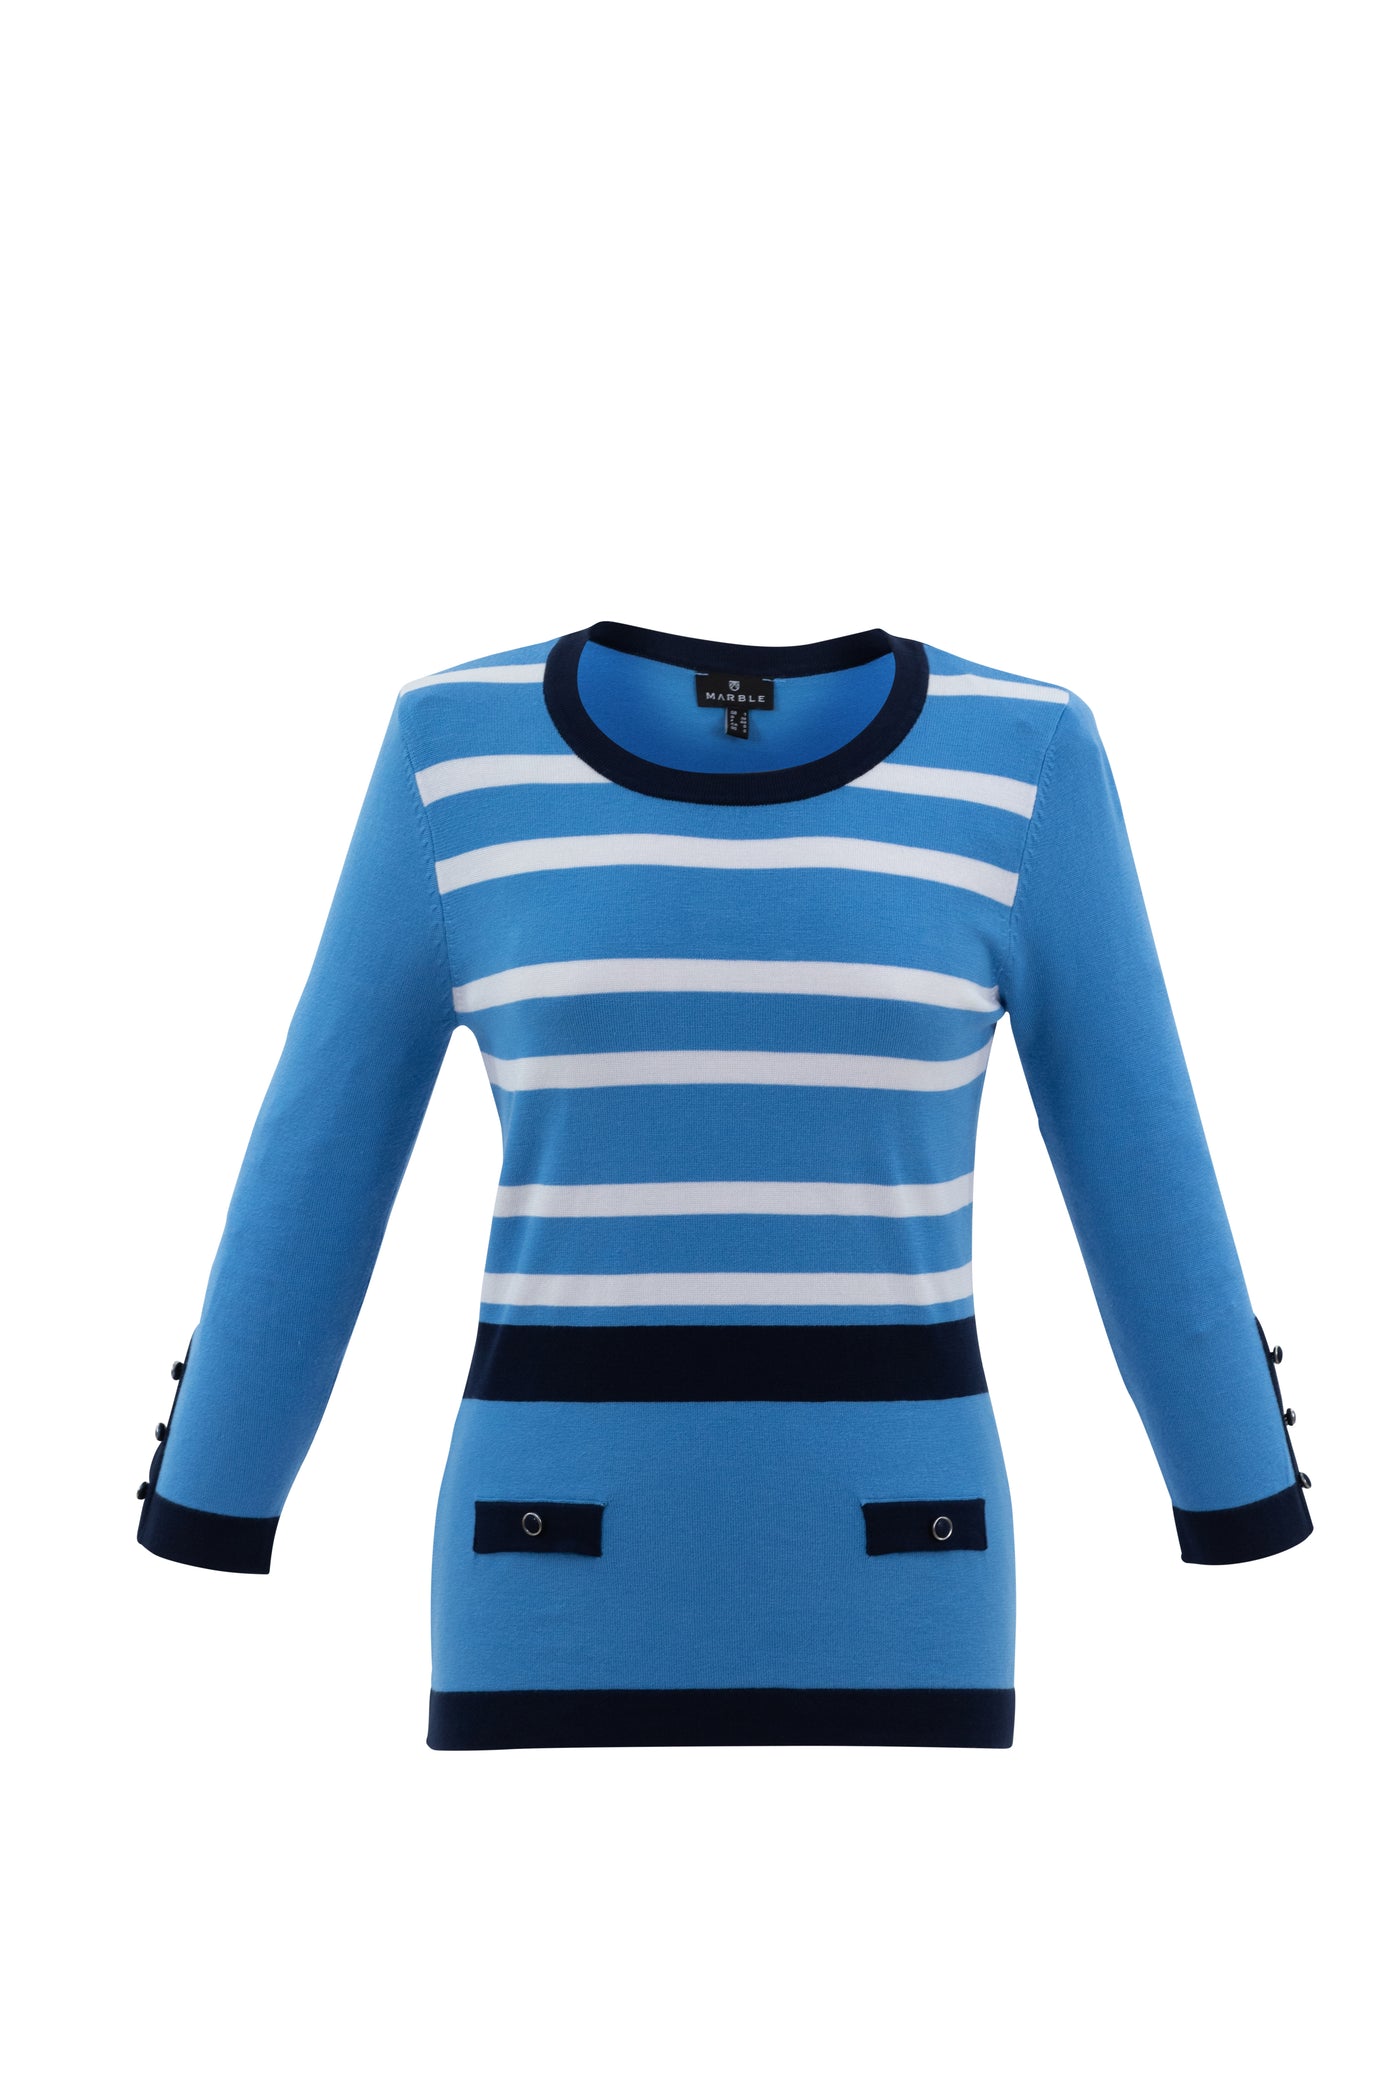 Blue/Navy/White Stripe Jumper With Buttons